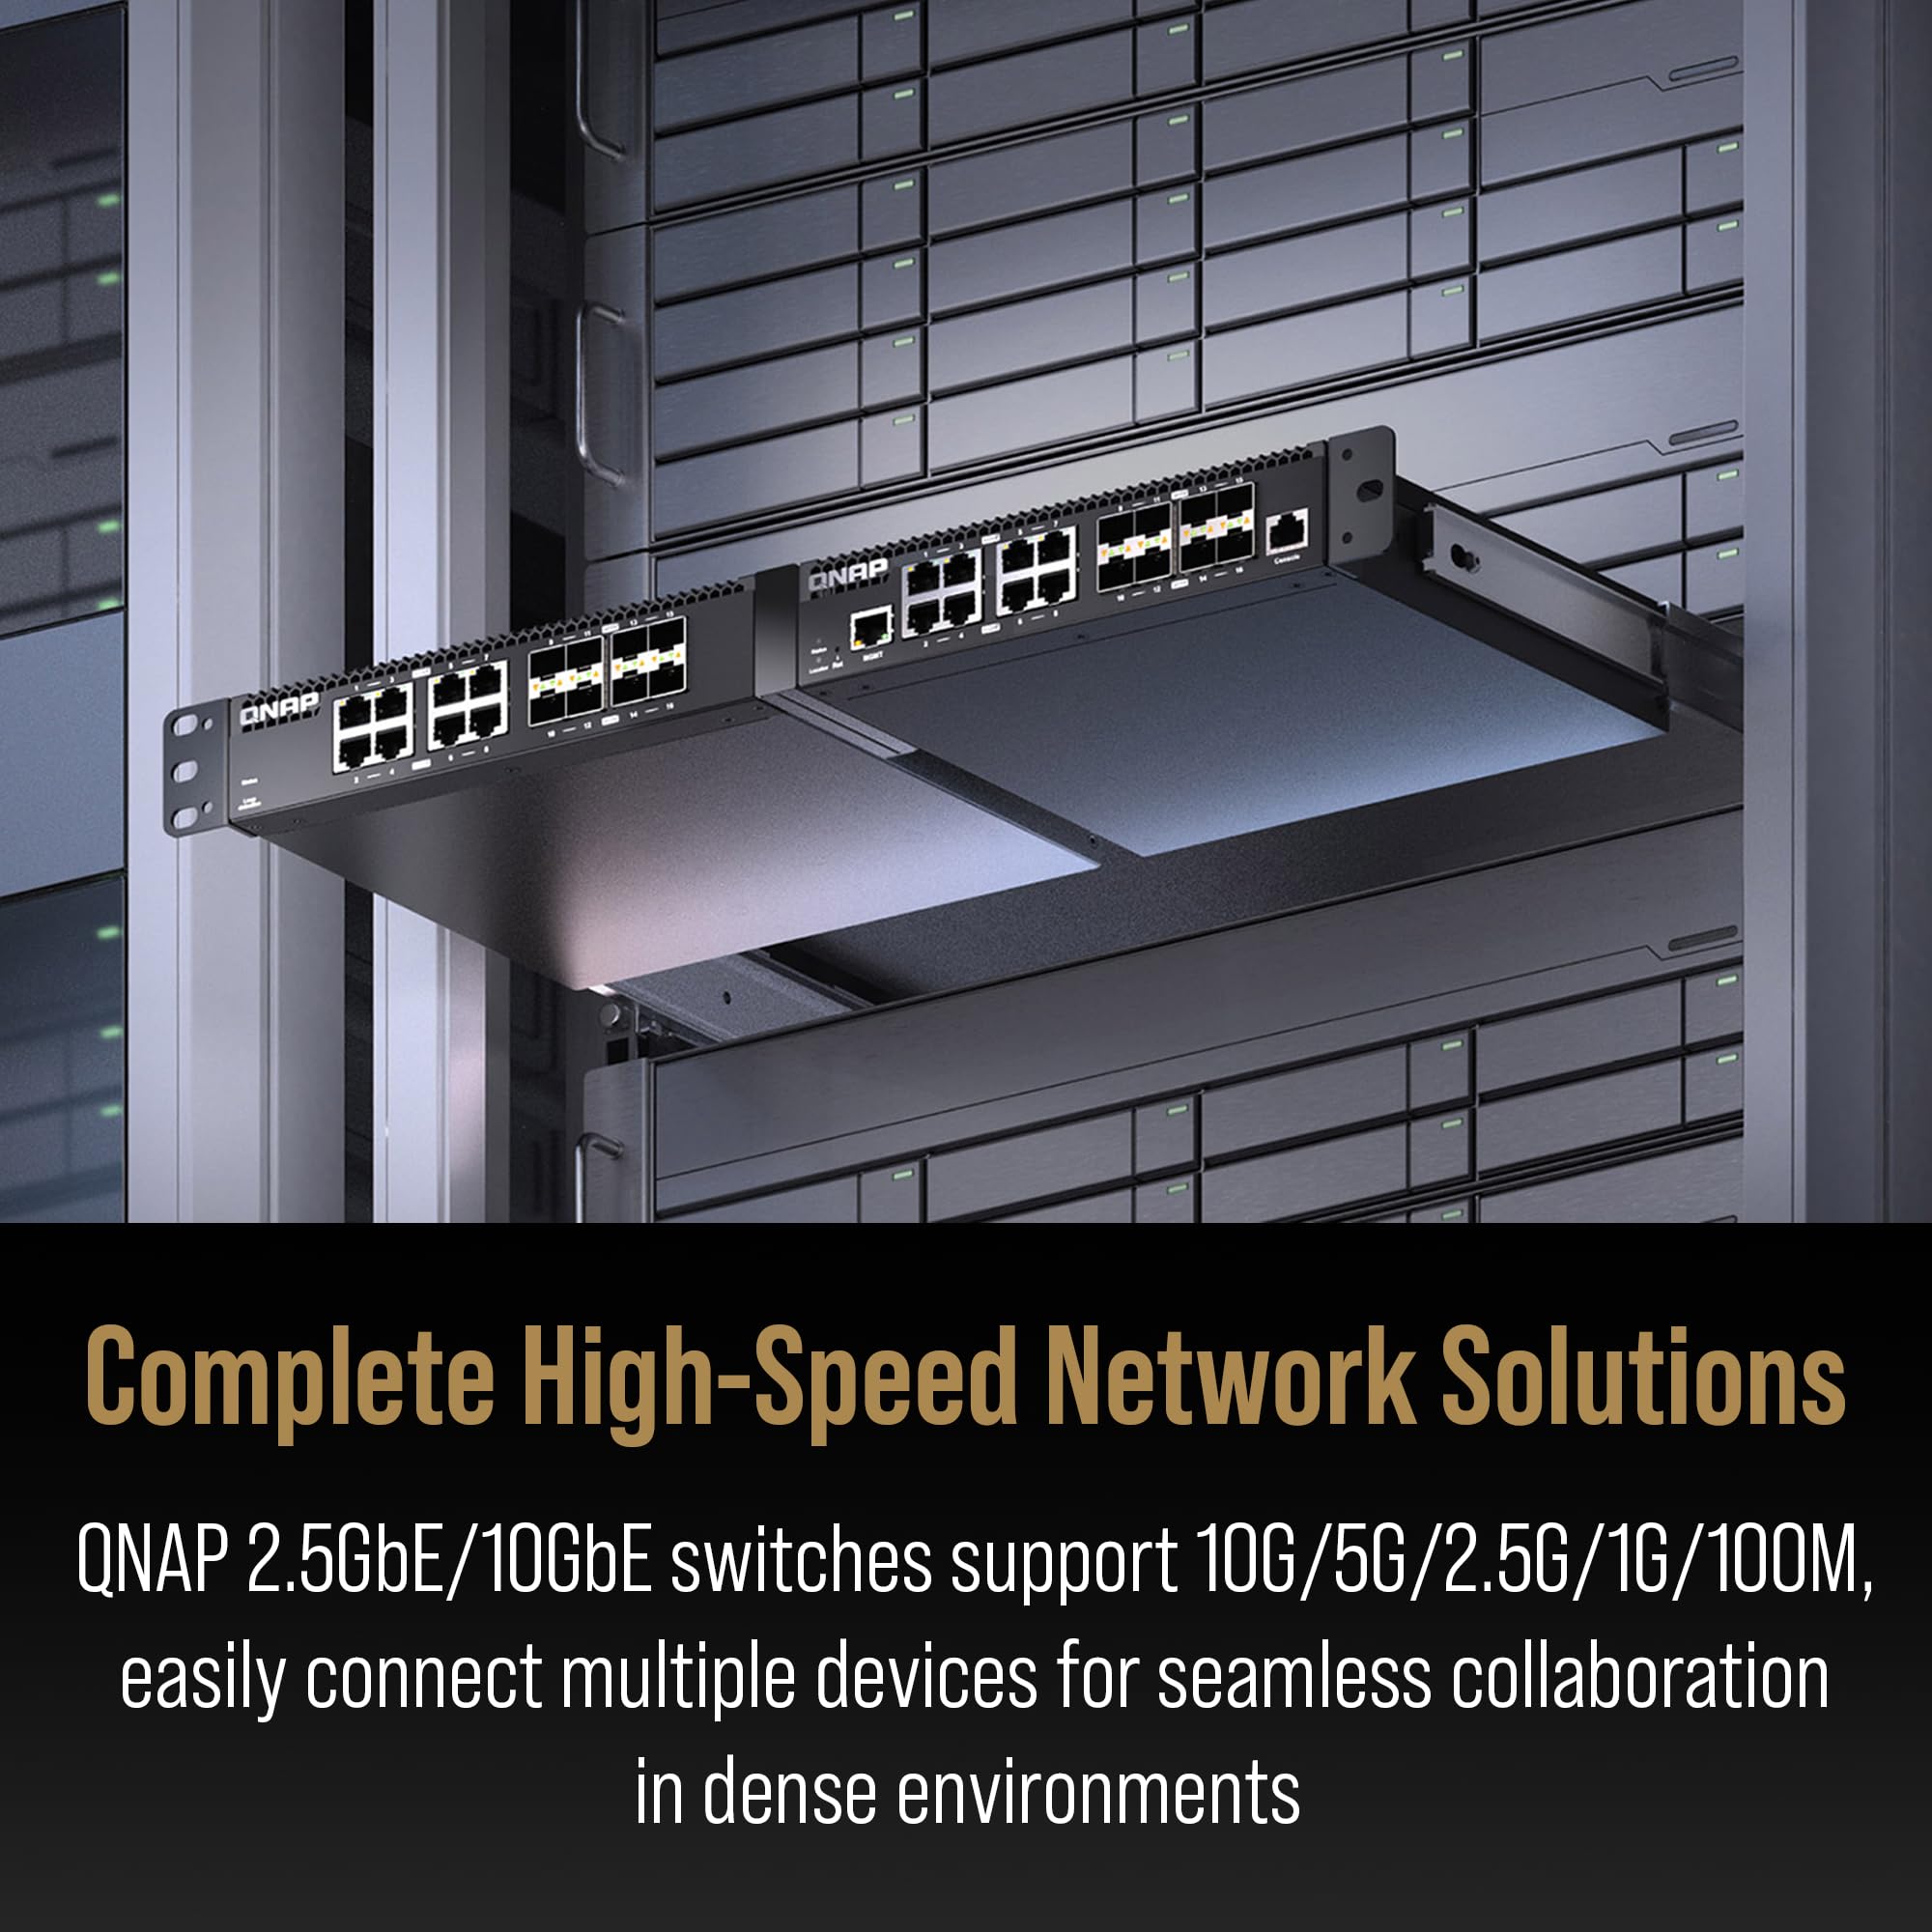 QNAP 16-Port Half-Width Rackmount 10GbE Managed Network Switch (QSW-M3216R-8S8T-US). Layer 2, Web Management